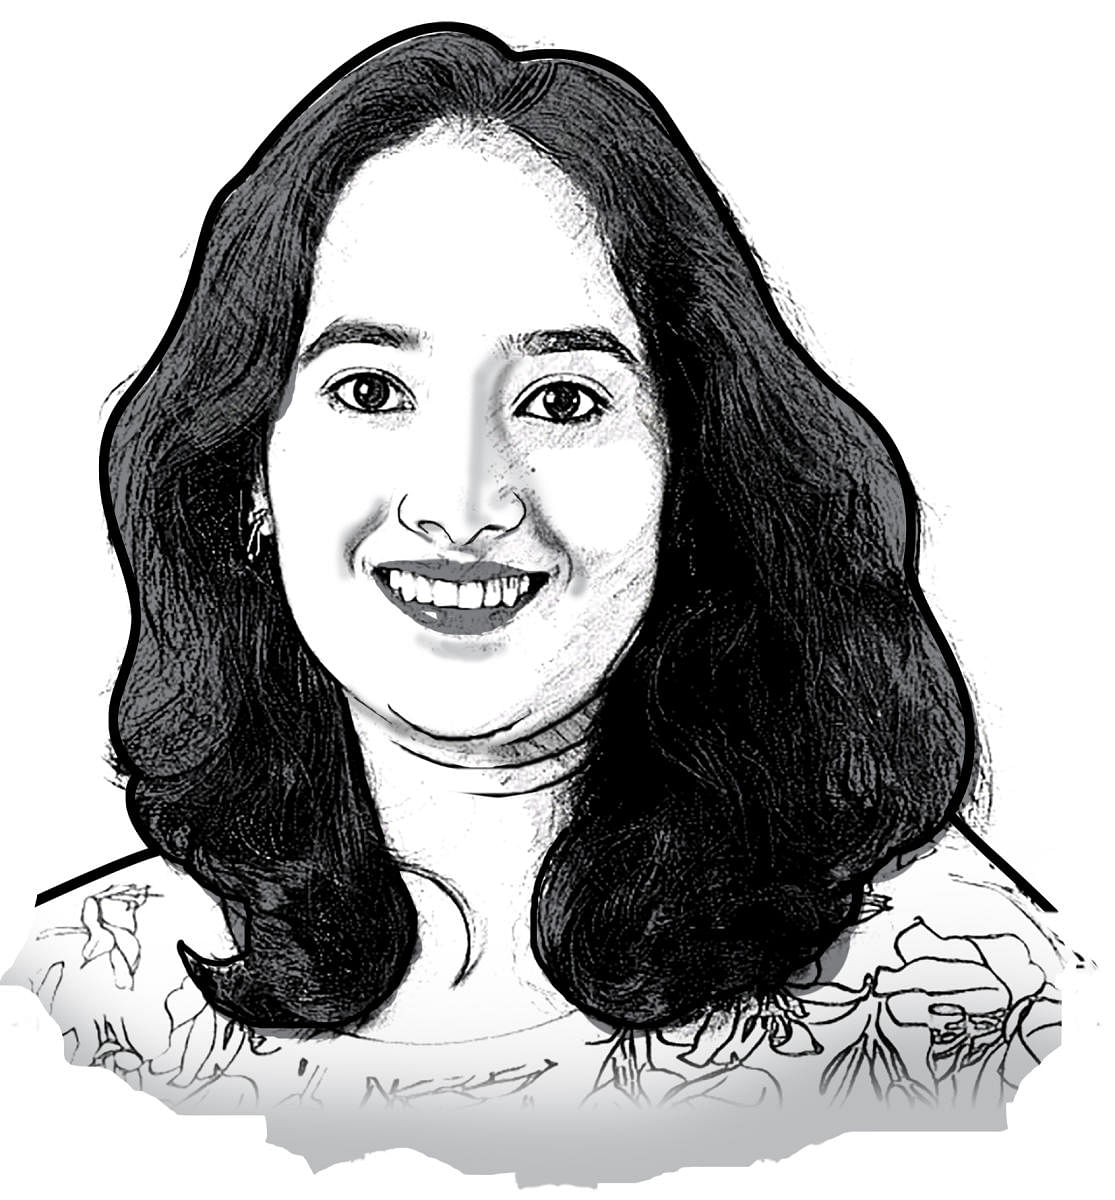 Anusha S Rao is a scholar of Sanskrit based in Toronto who likes writing new things about very old things @AnushaSRao2. Credit: DH Illustration